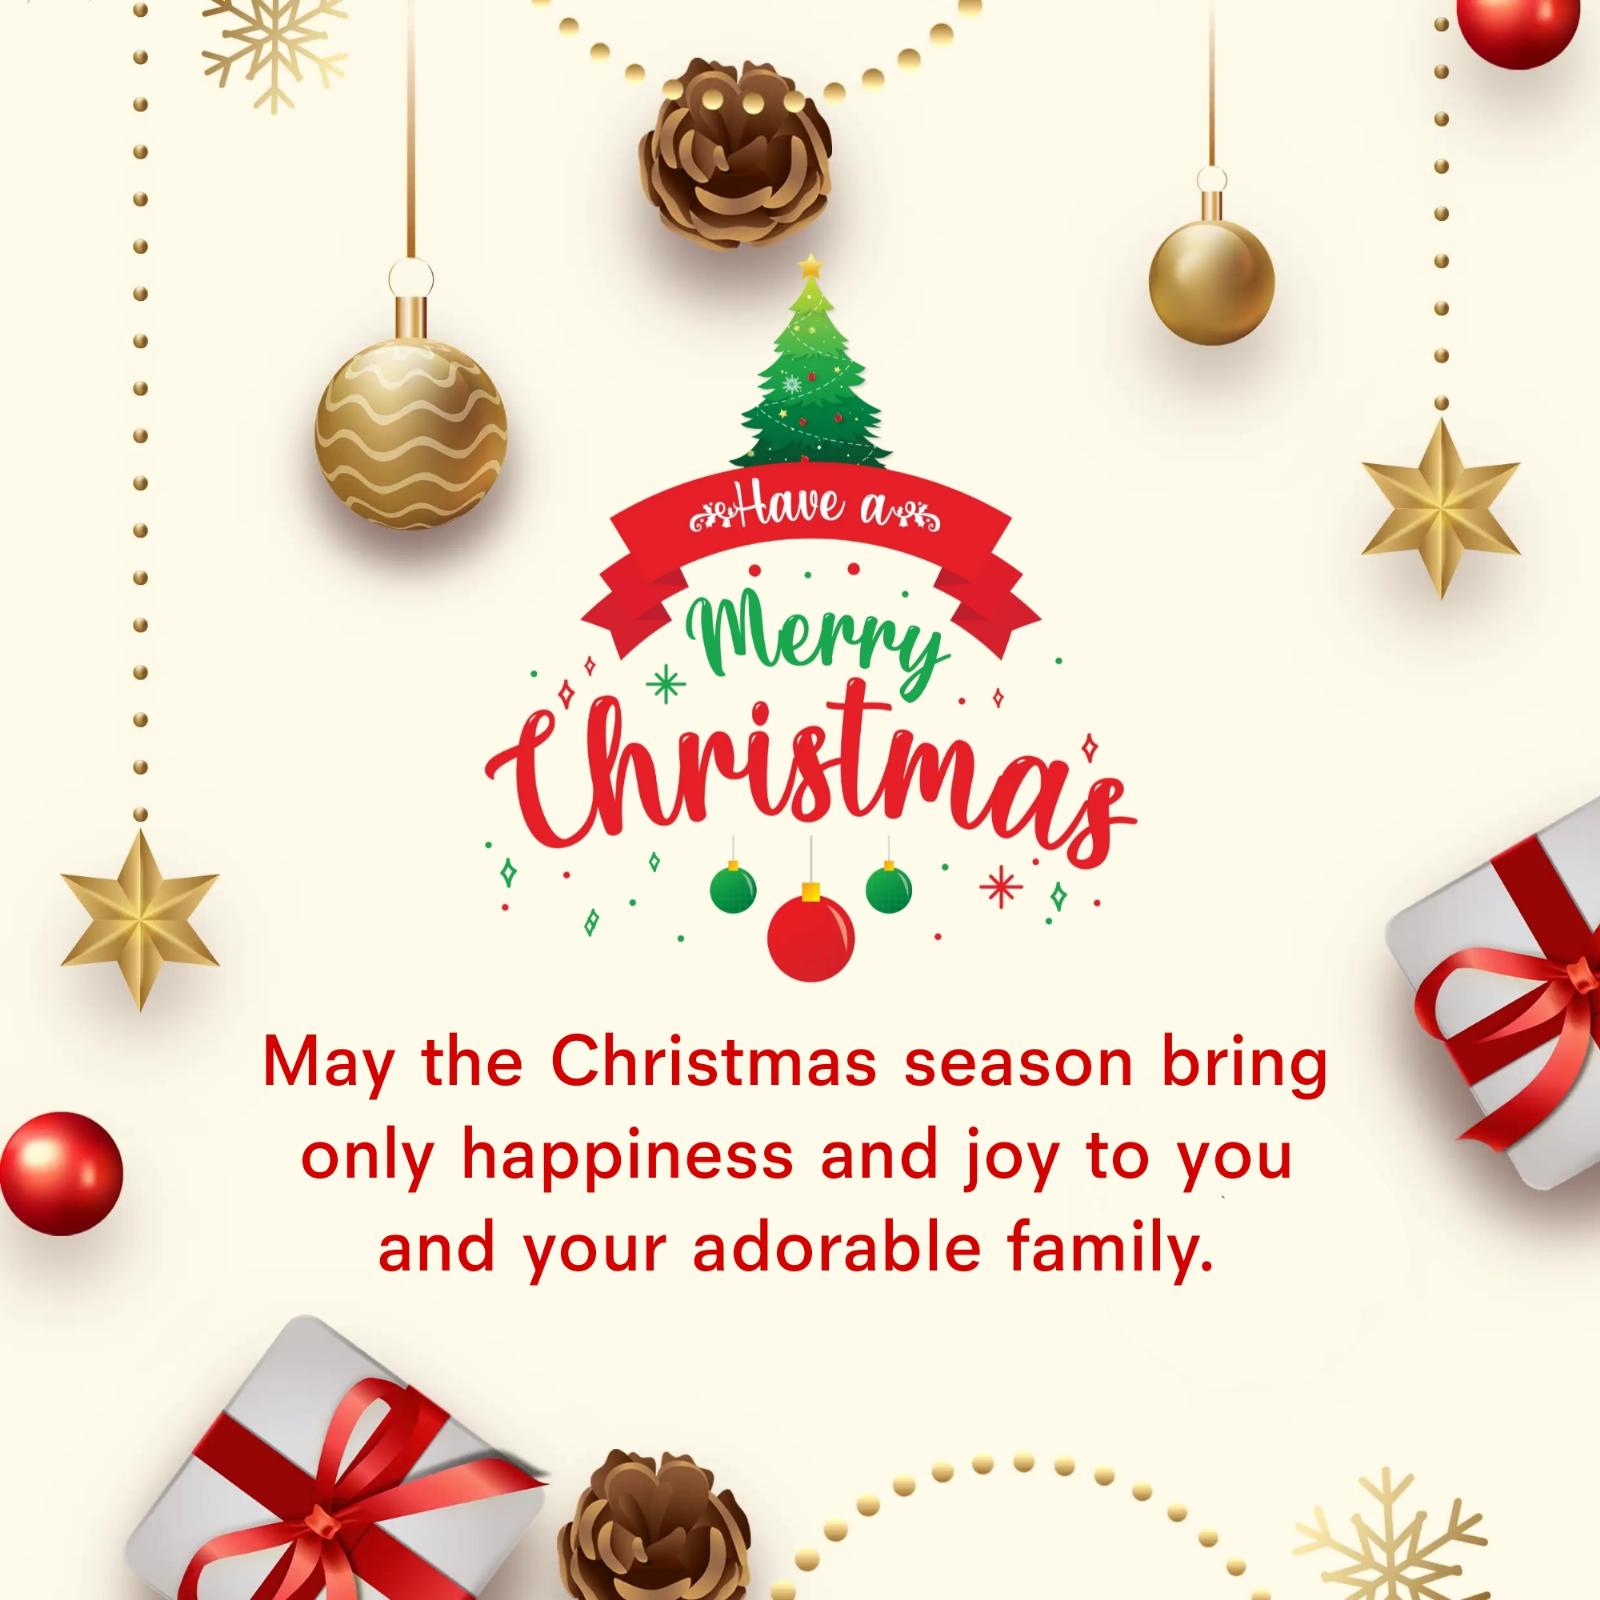 May the Christmas season bring only happiness and joy